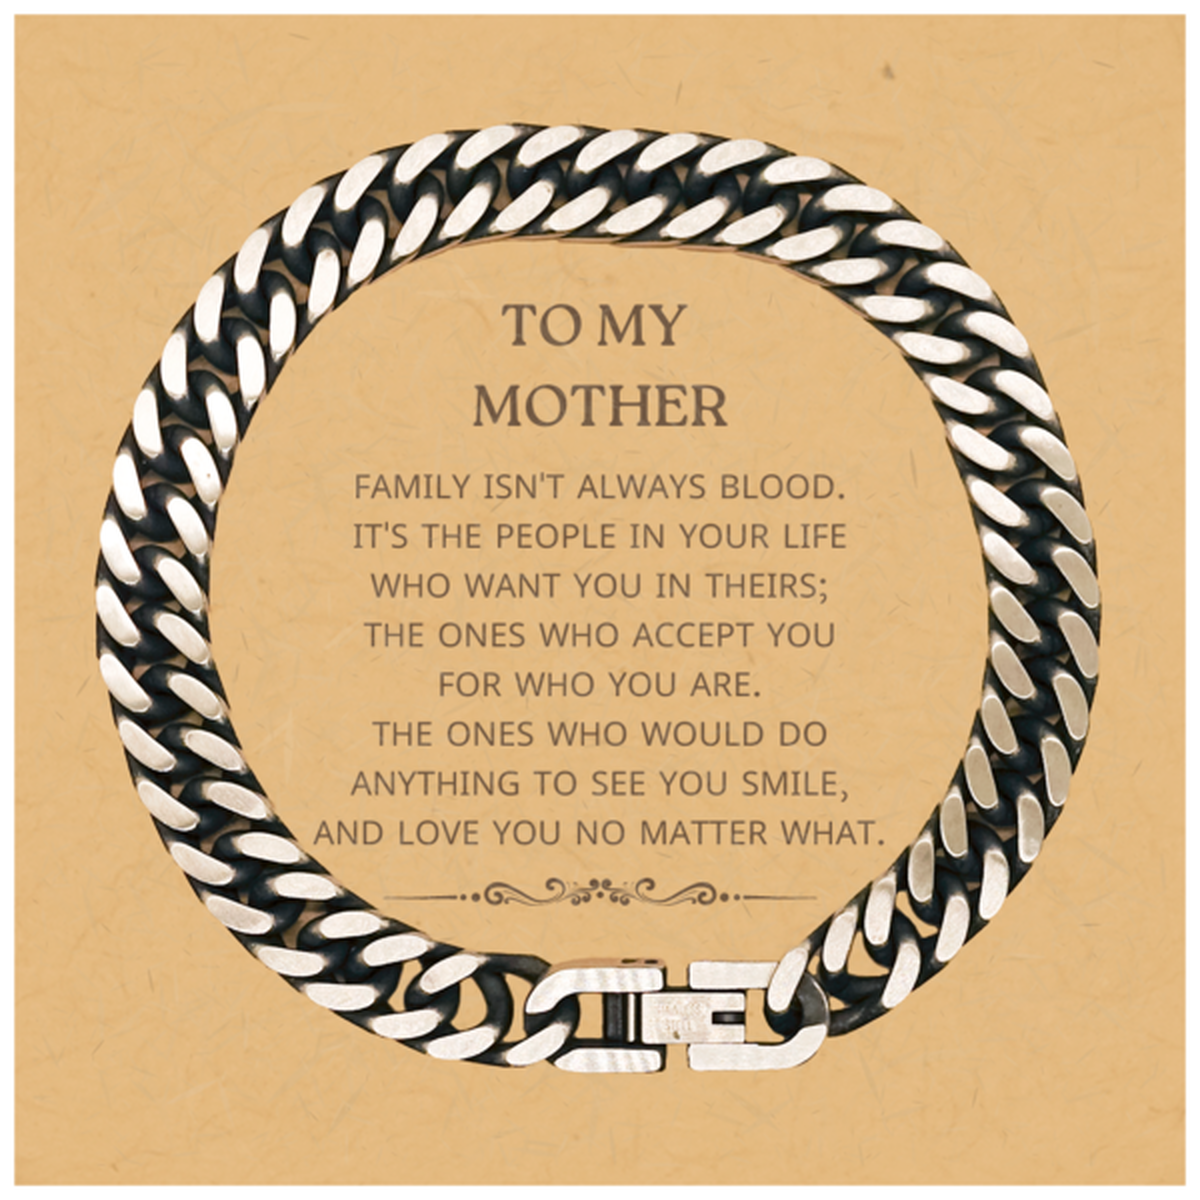 To My Mother Gifts, Family isn't always blood, Mother Cuban Link Chain Bracelet, Birthday Christmas Unique Present For Mother